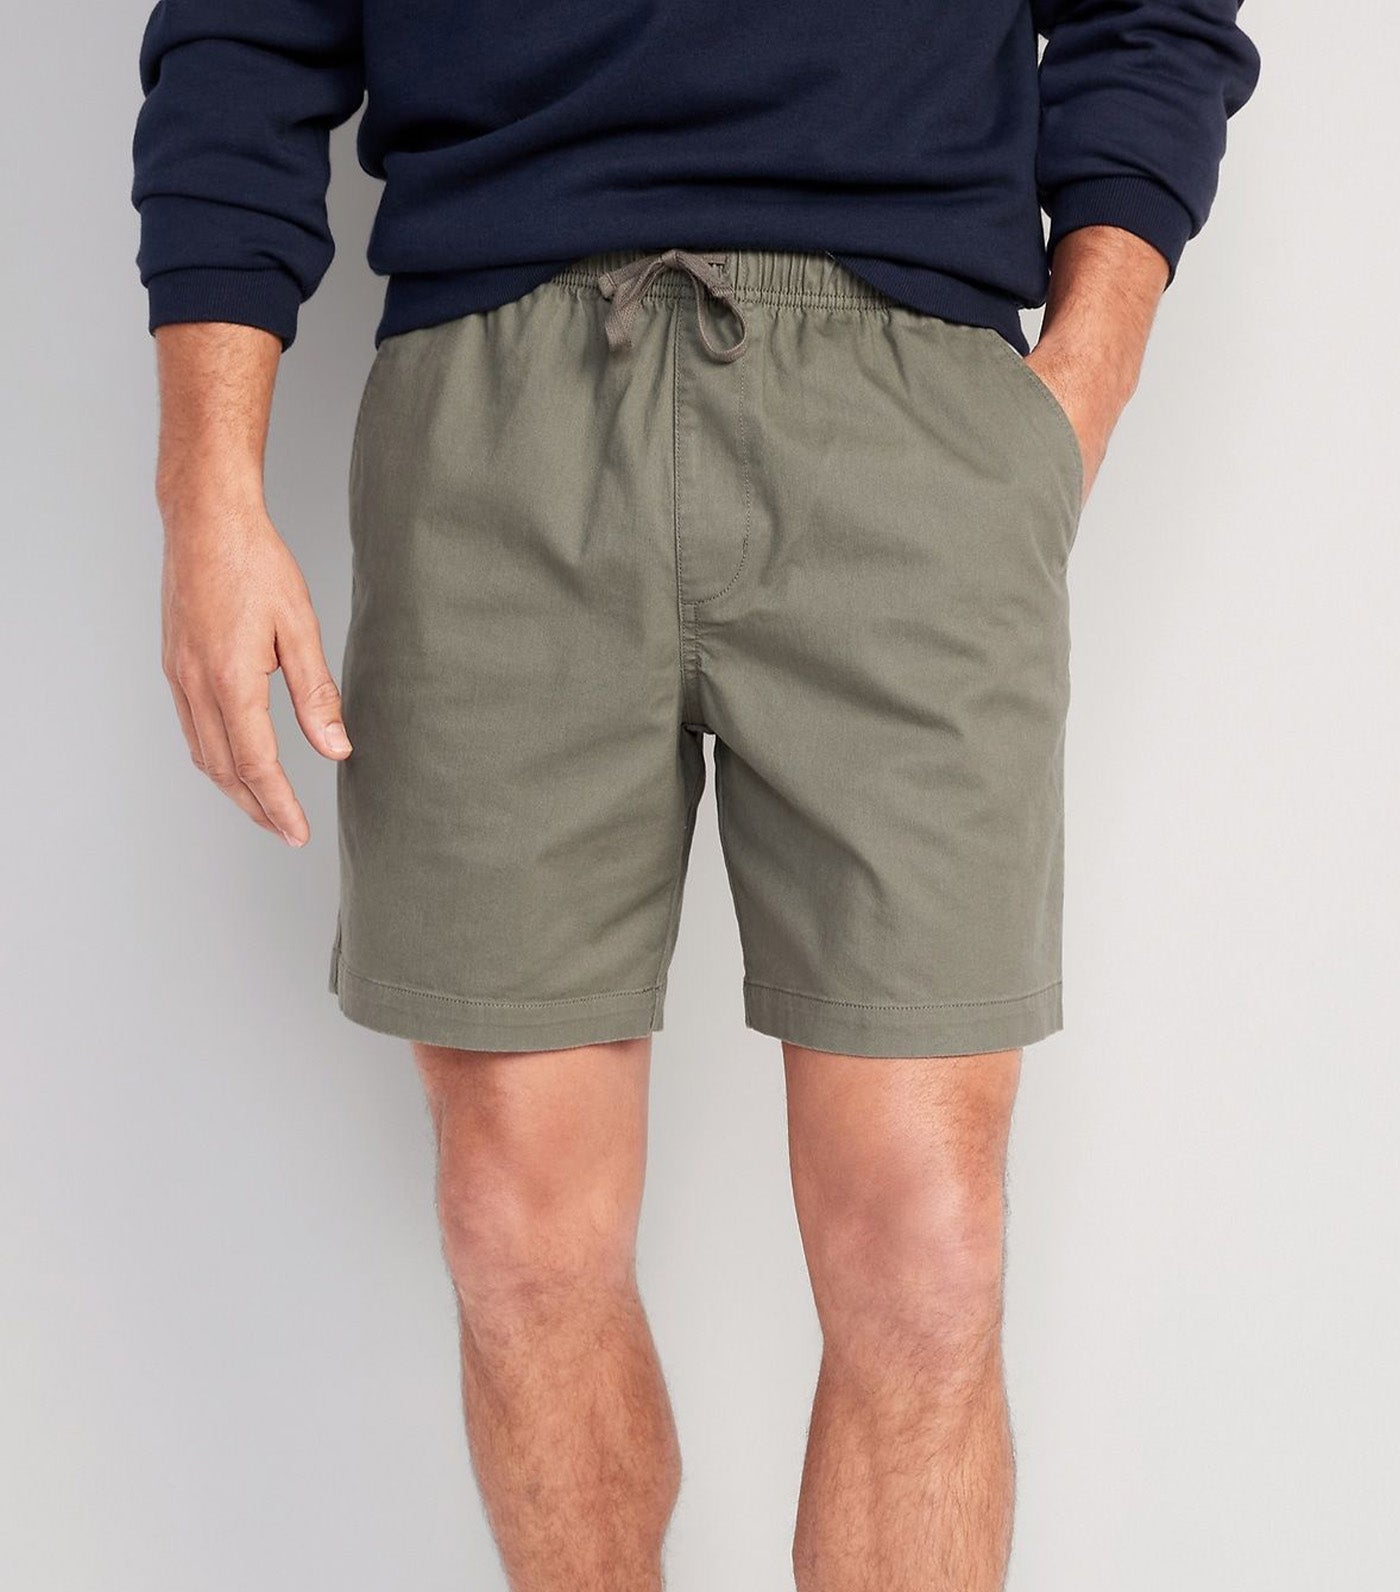 Pull-On Chino Jogger Shorts for Men - 7-inch inseam Stone Wall